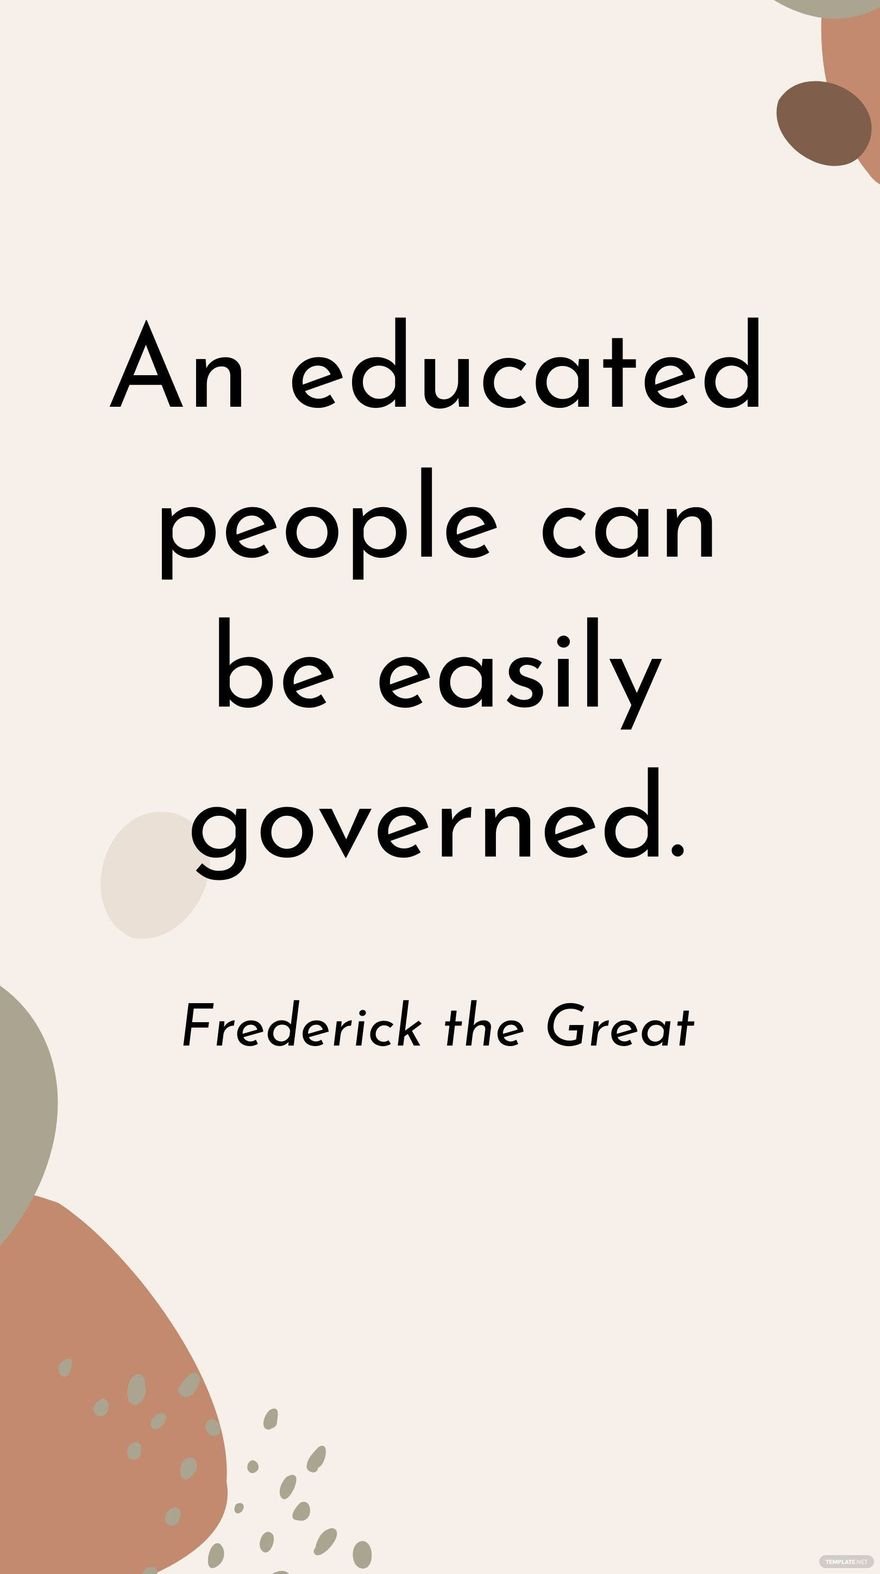 Free Frederick the Great - An educated people can be easily governed. in JPG